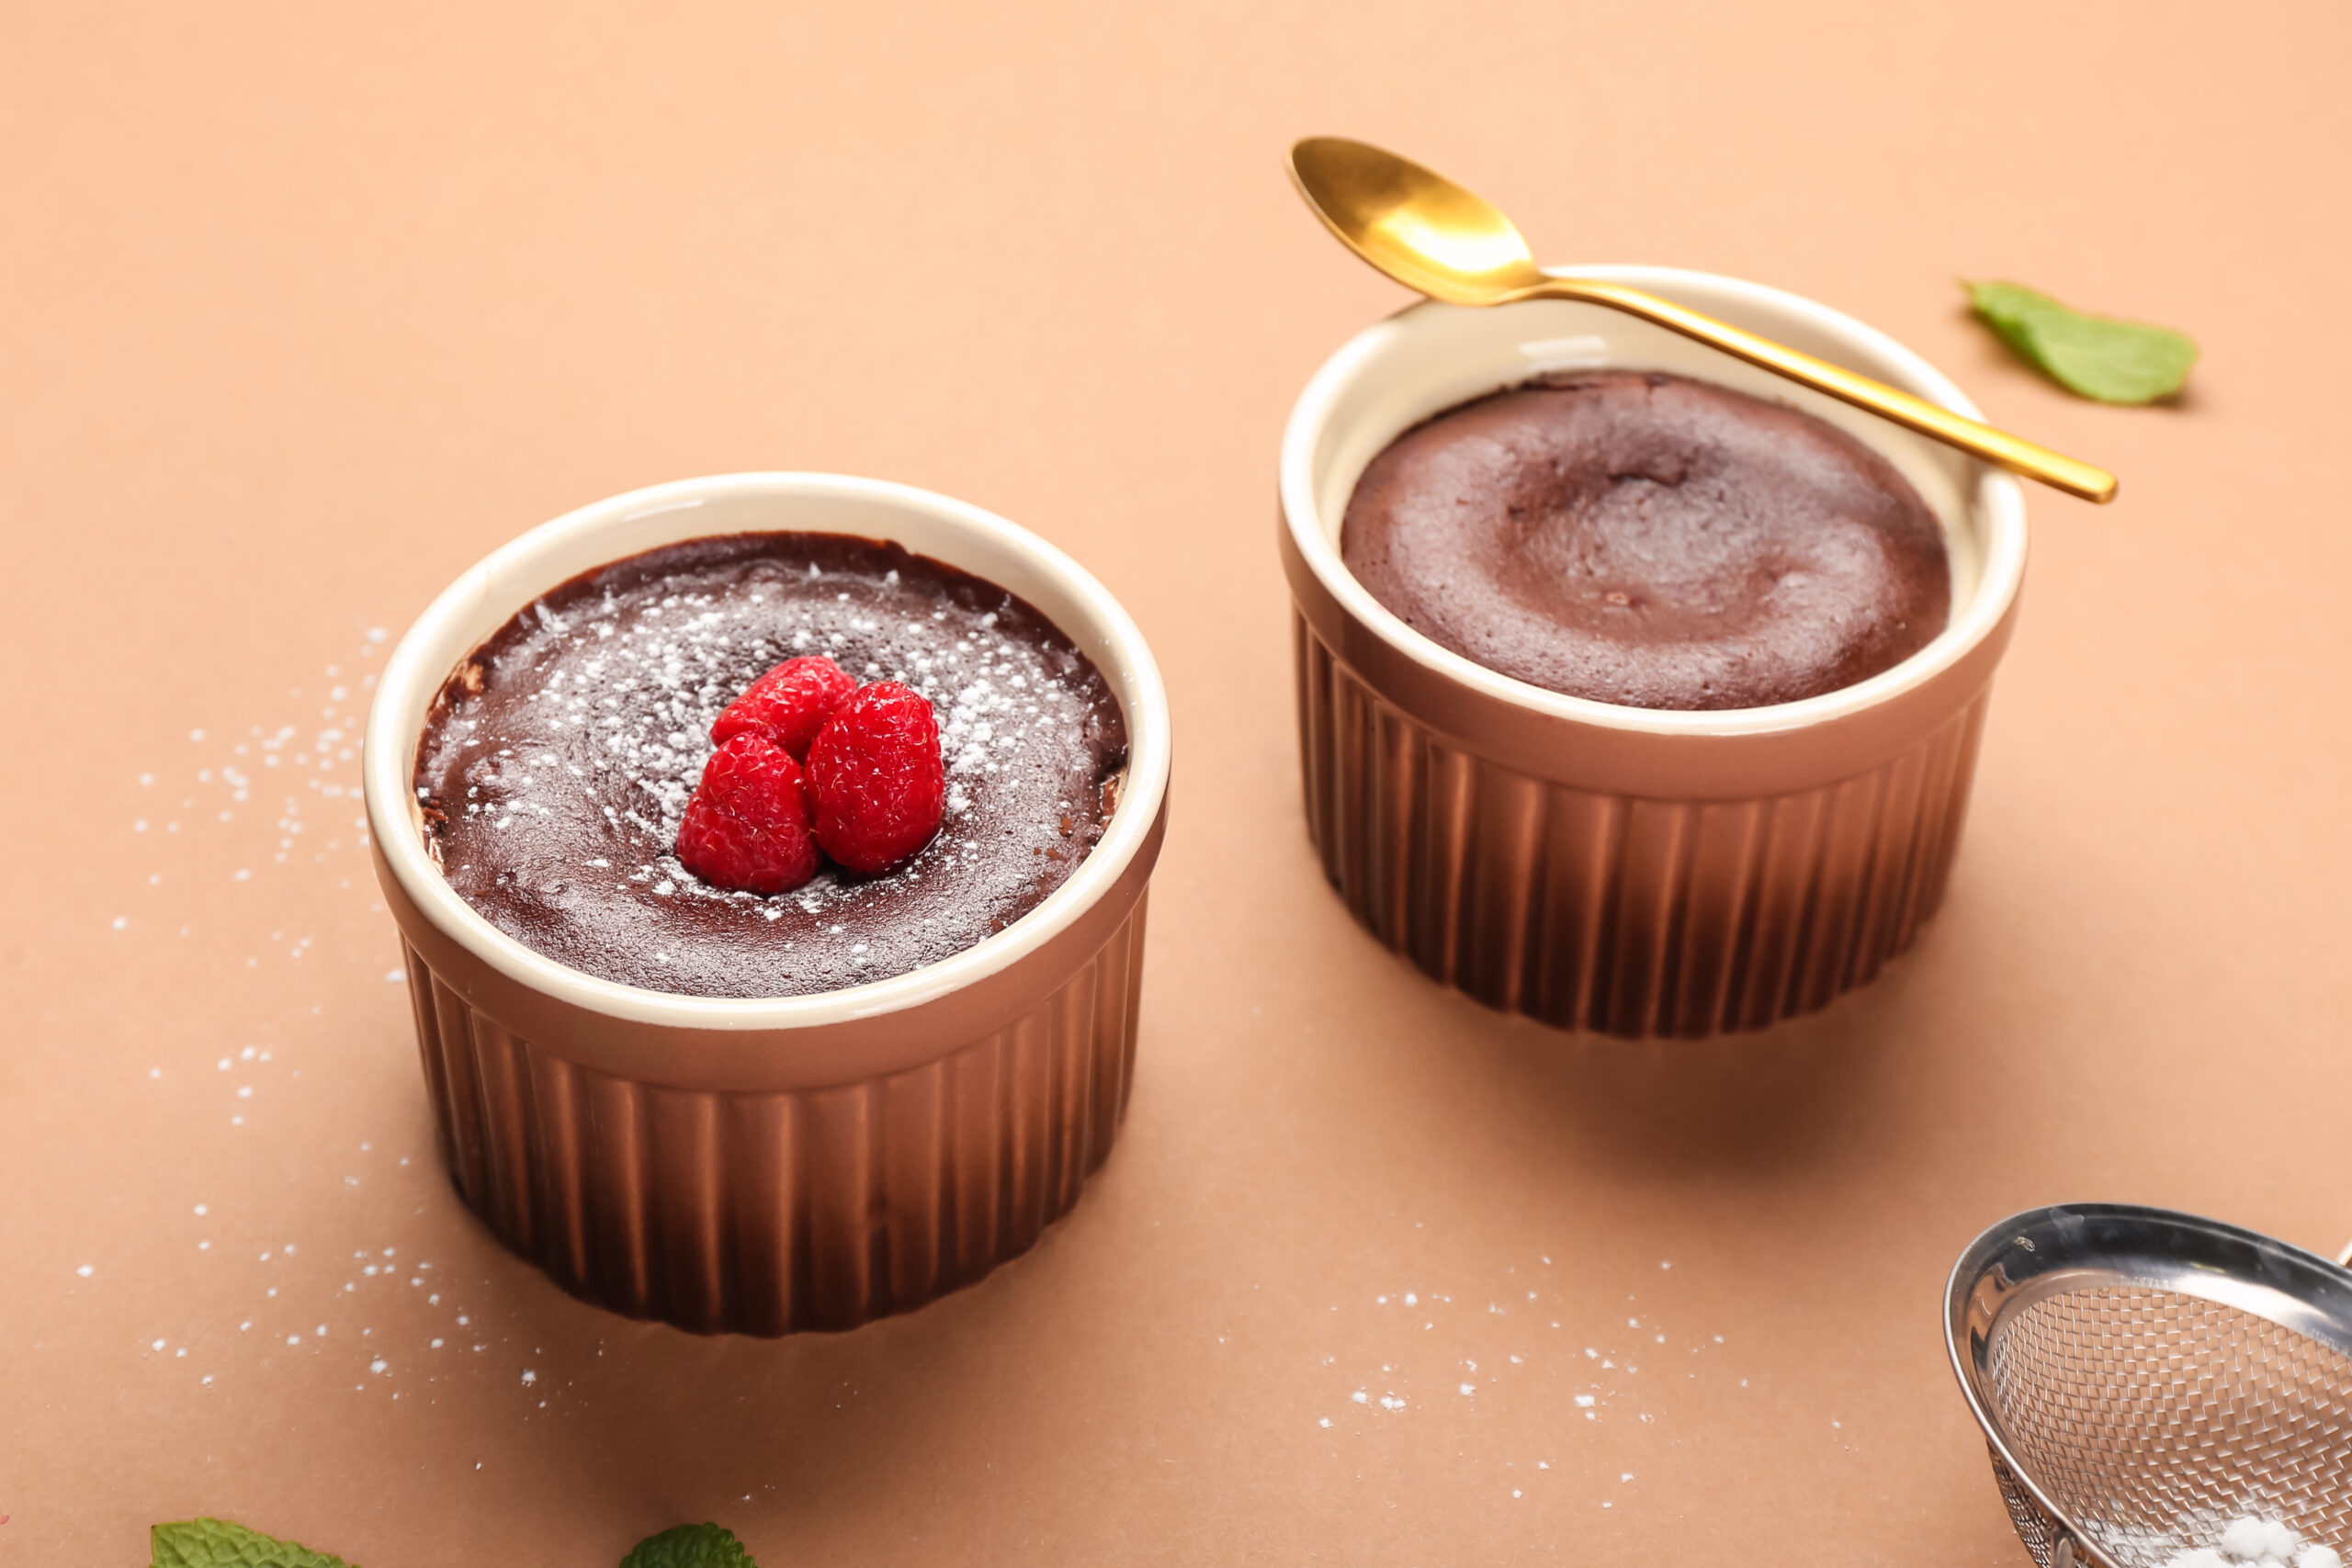 Chocolate Souffle Recipe, a spongy sweet ideal for a surprise